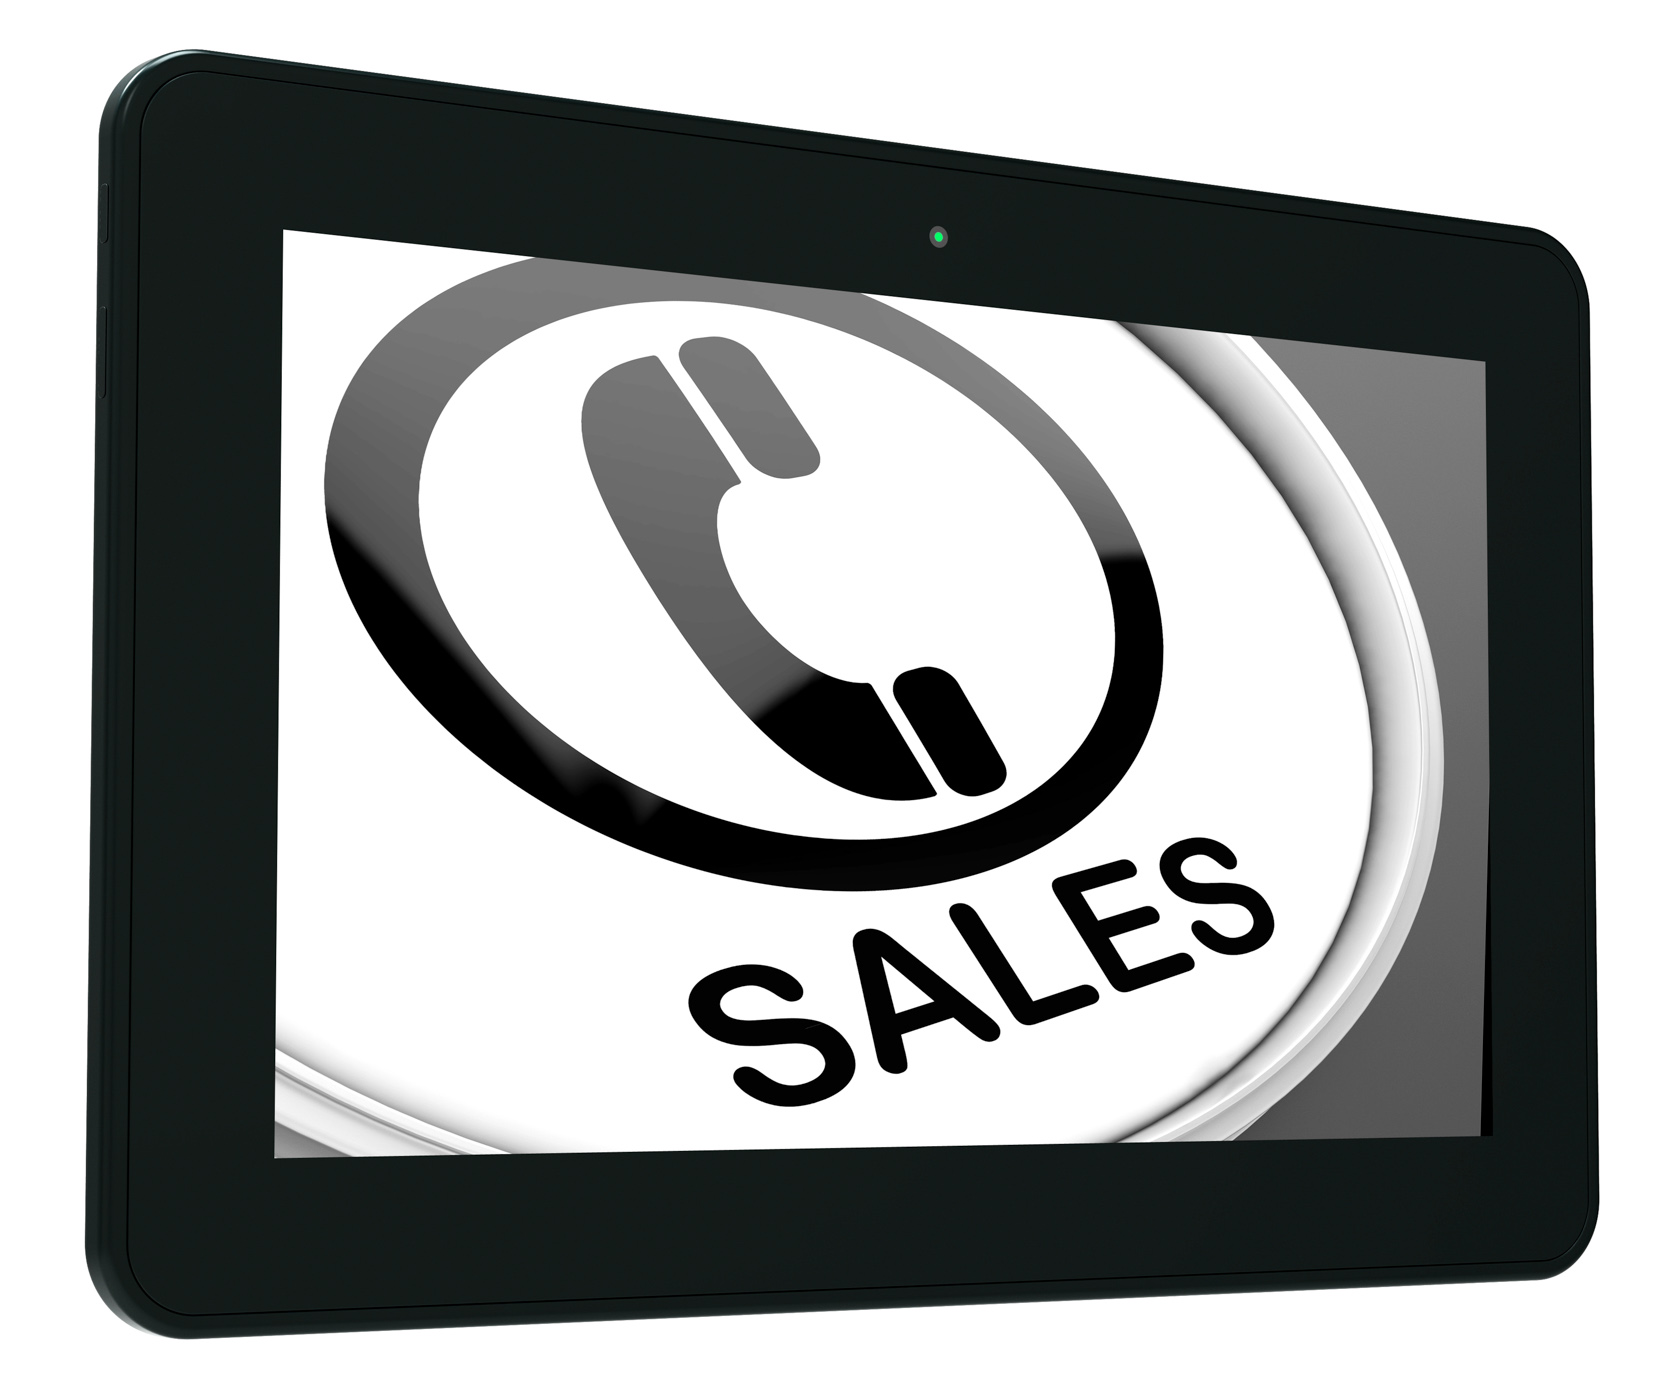 Sales tablet shows call for sales assistance photo